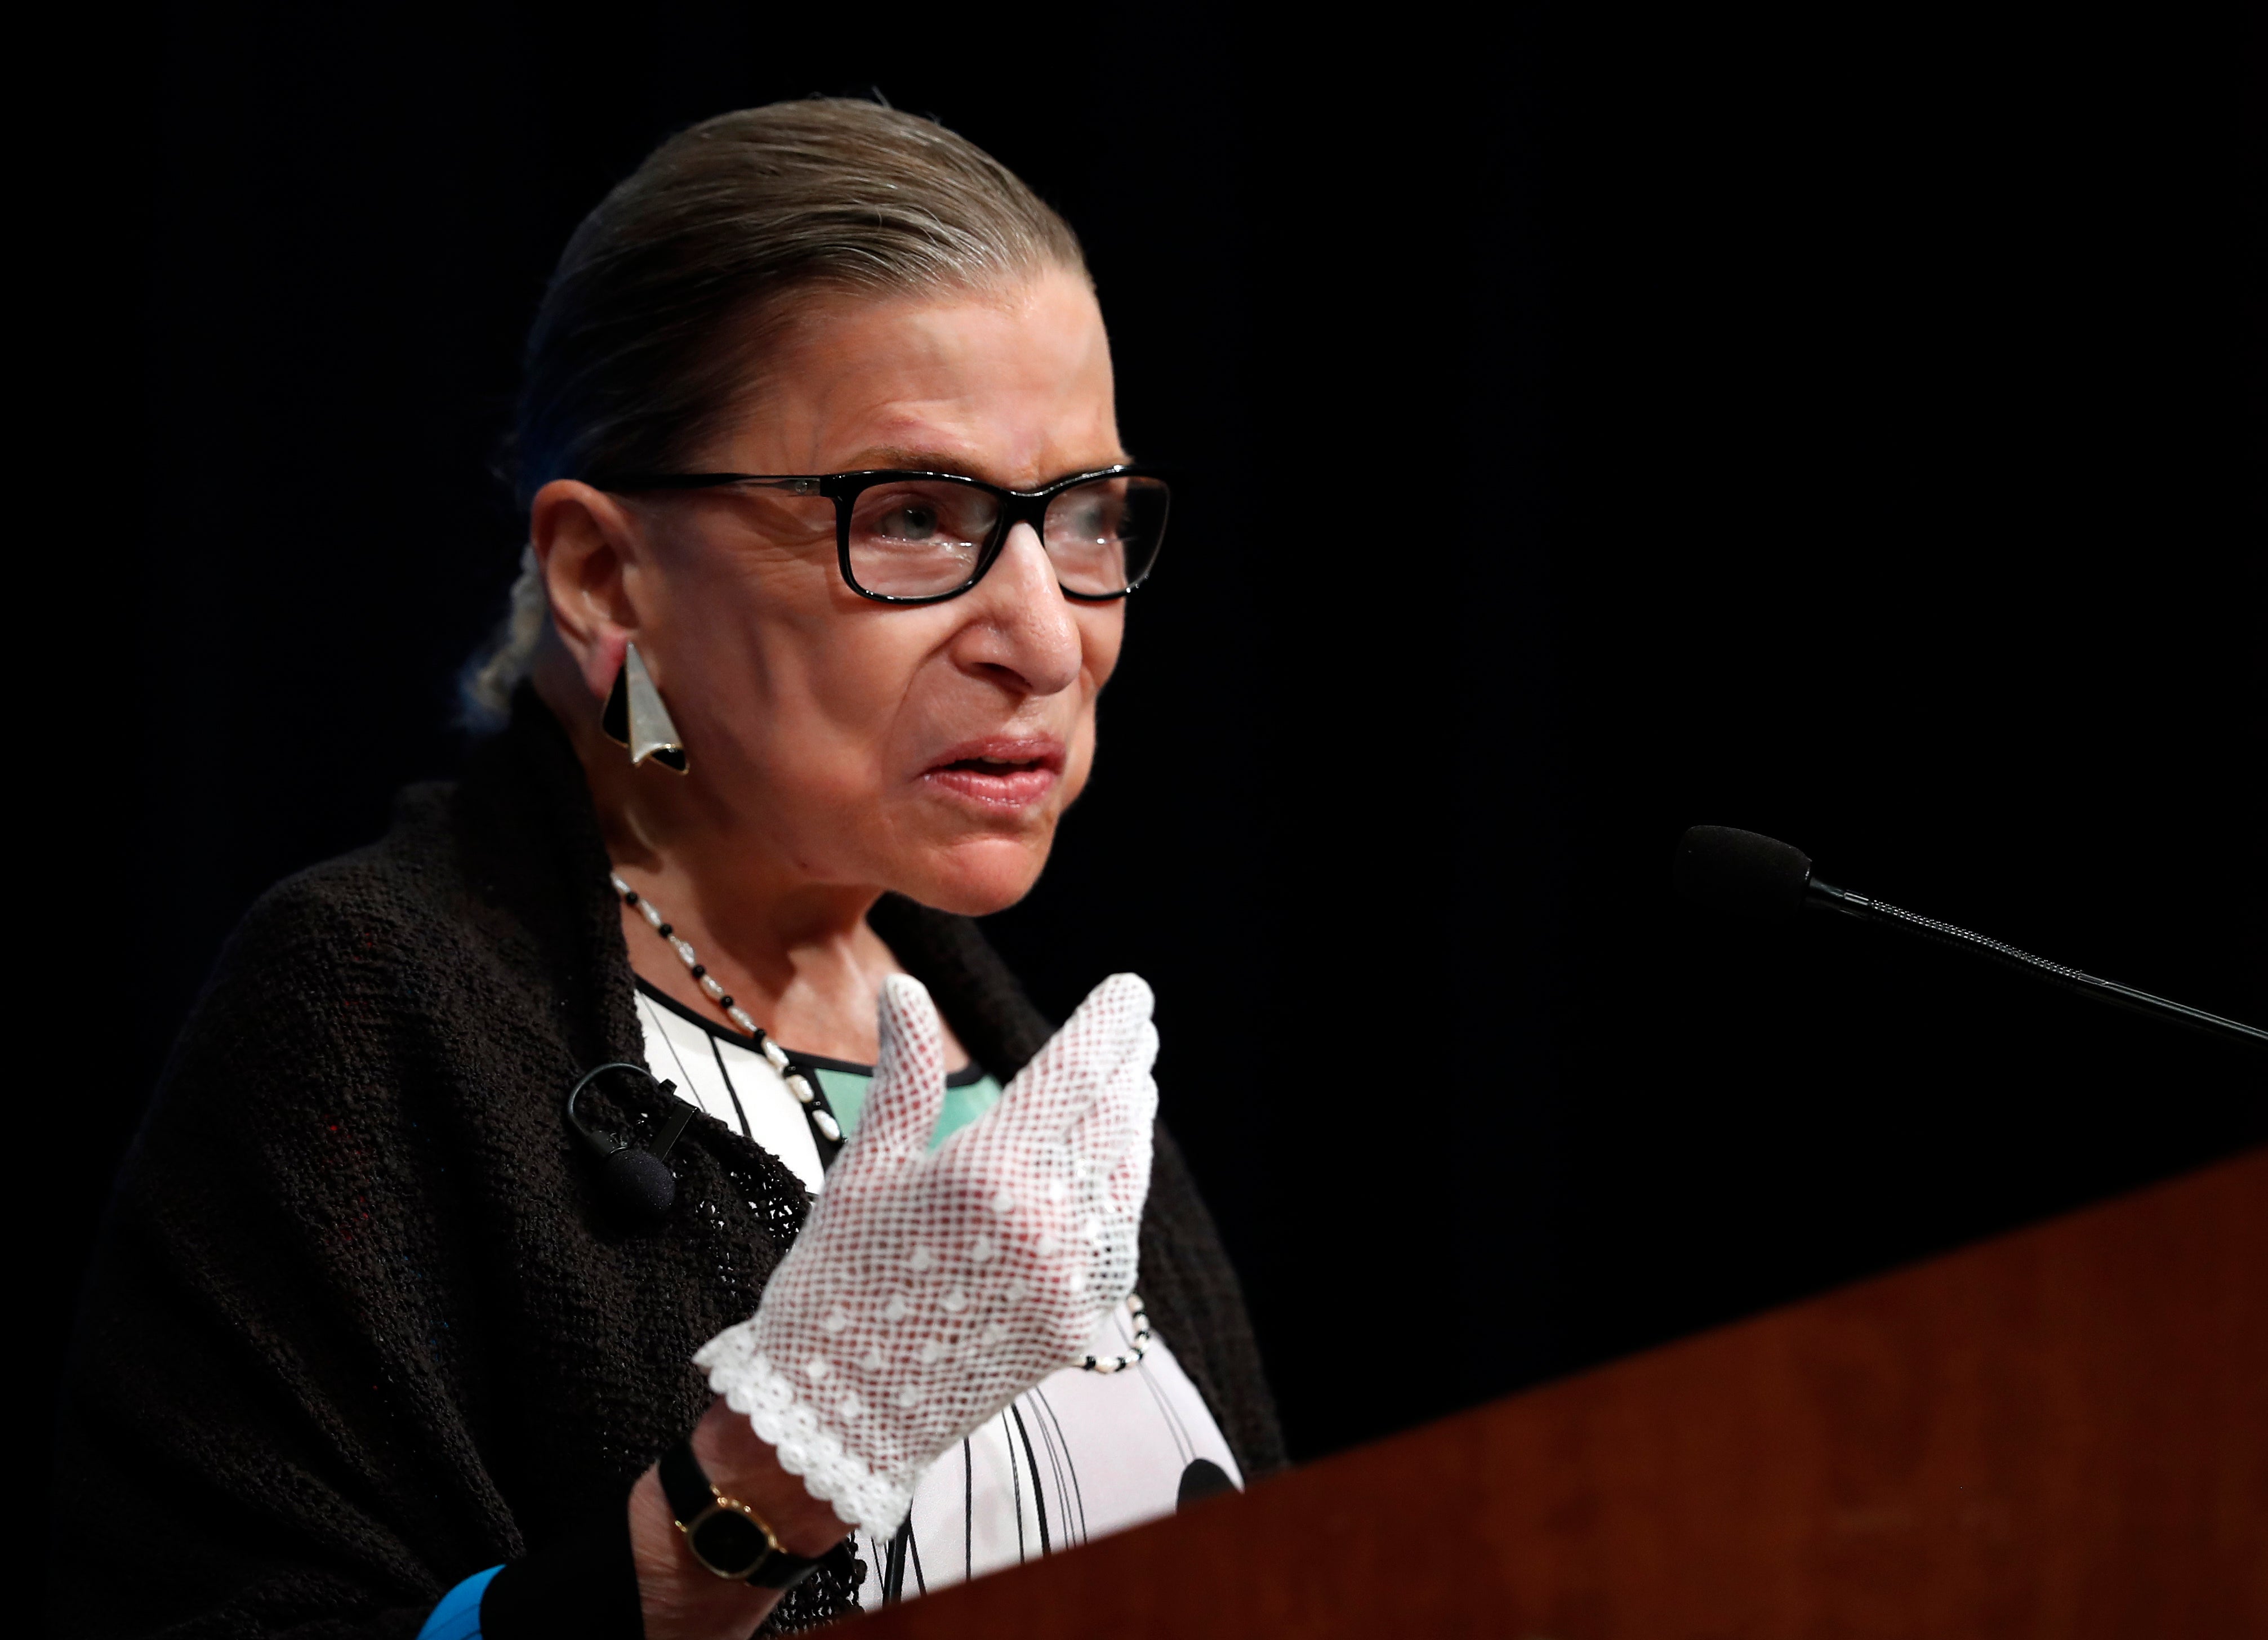 Bader Ginsburg was known for her sometimes blistering judicial dissents